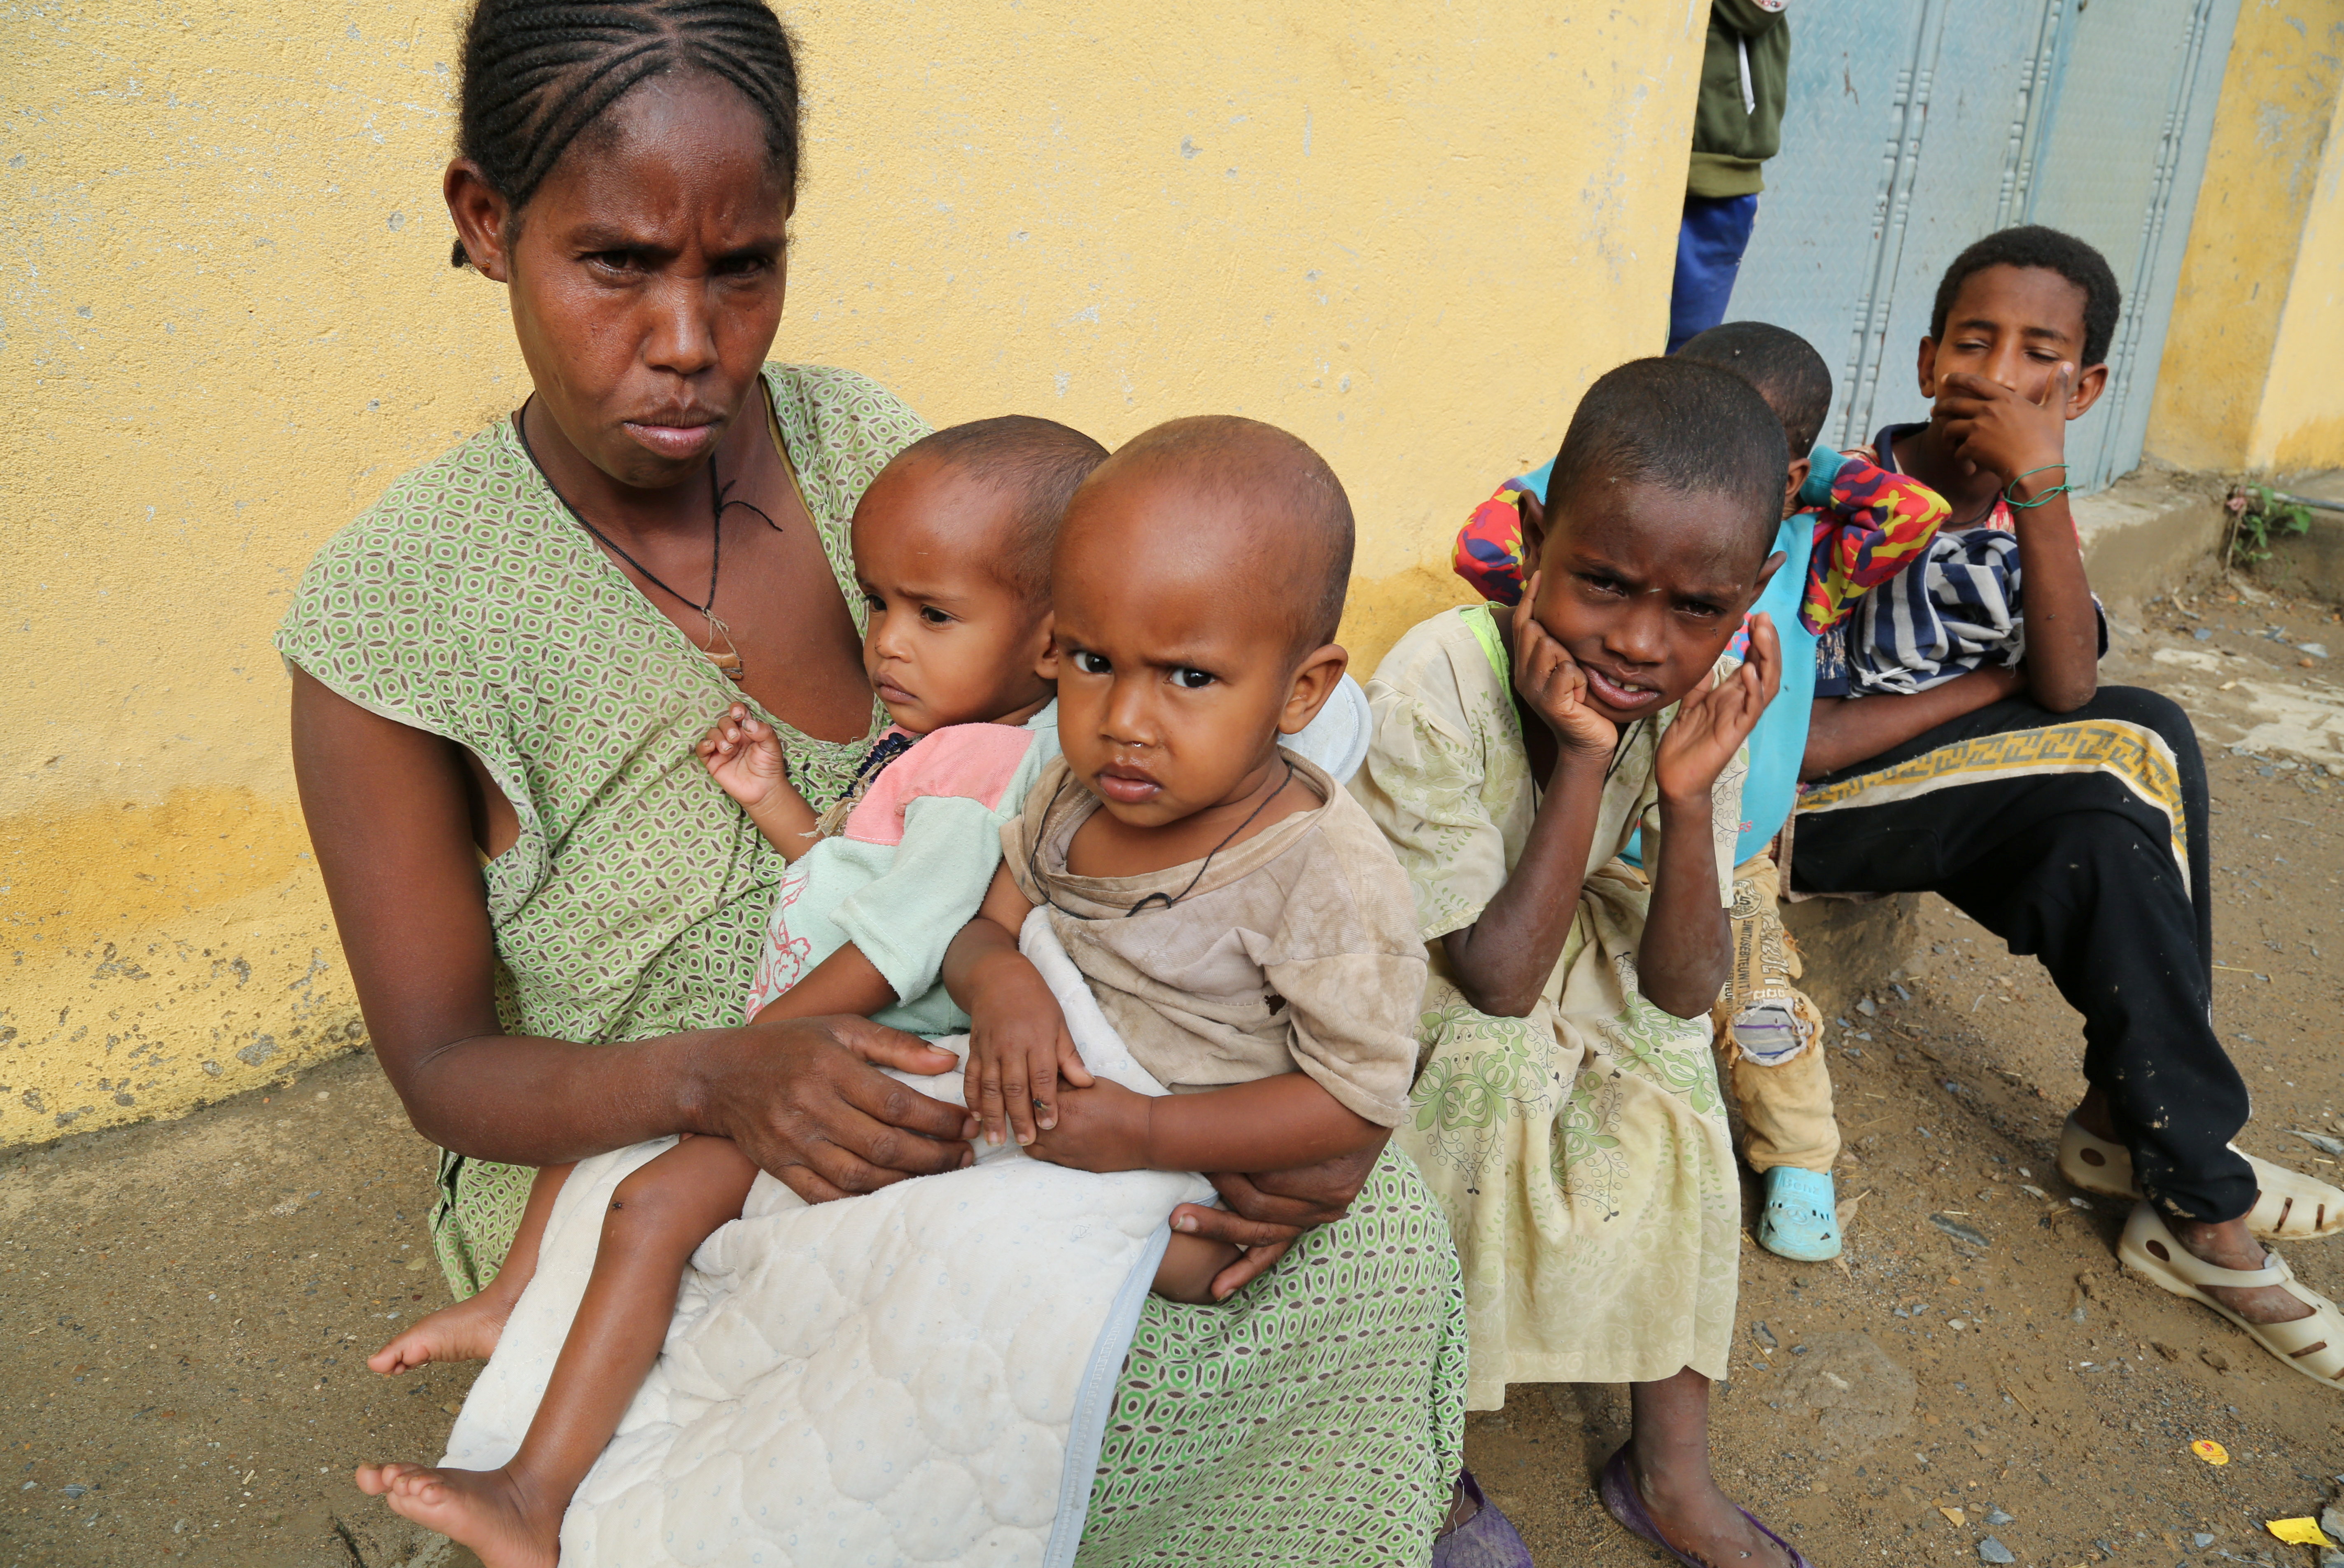 Food aid runs out in the Tigray region of Ethiopia